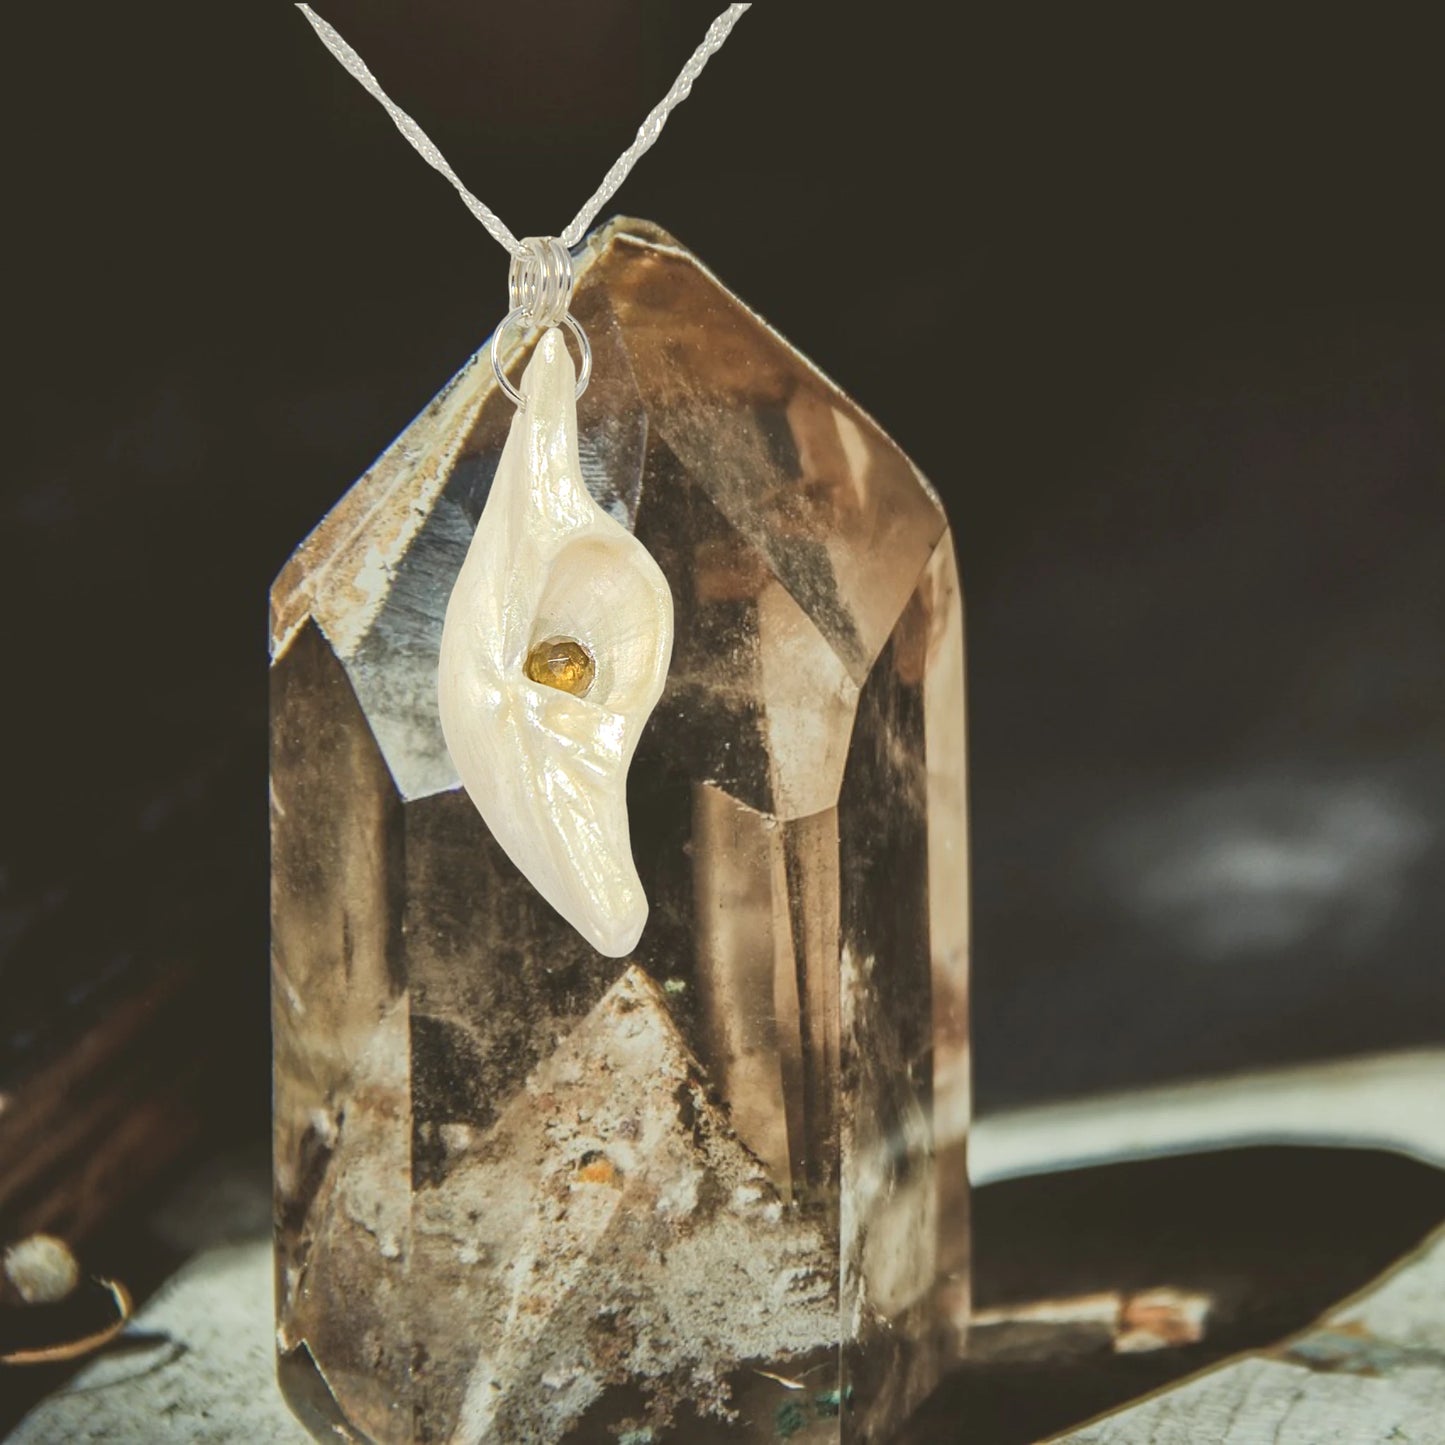 Seer is a natural seashell pendant with a beautiful 5mm rose cut Smokey Quartz compliments the pendant. The pendant is shown in front of a larger piece of smoky quartz.